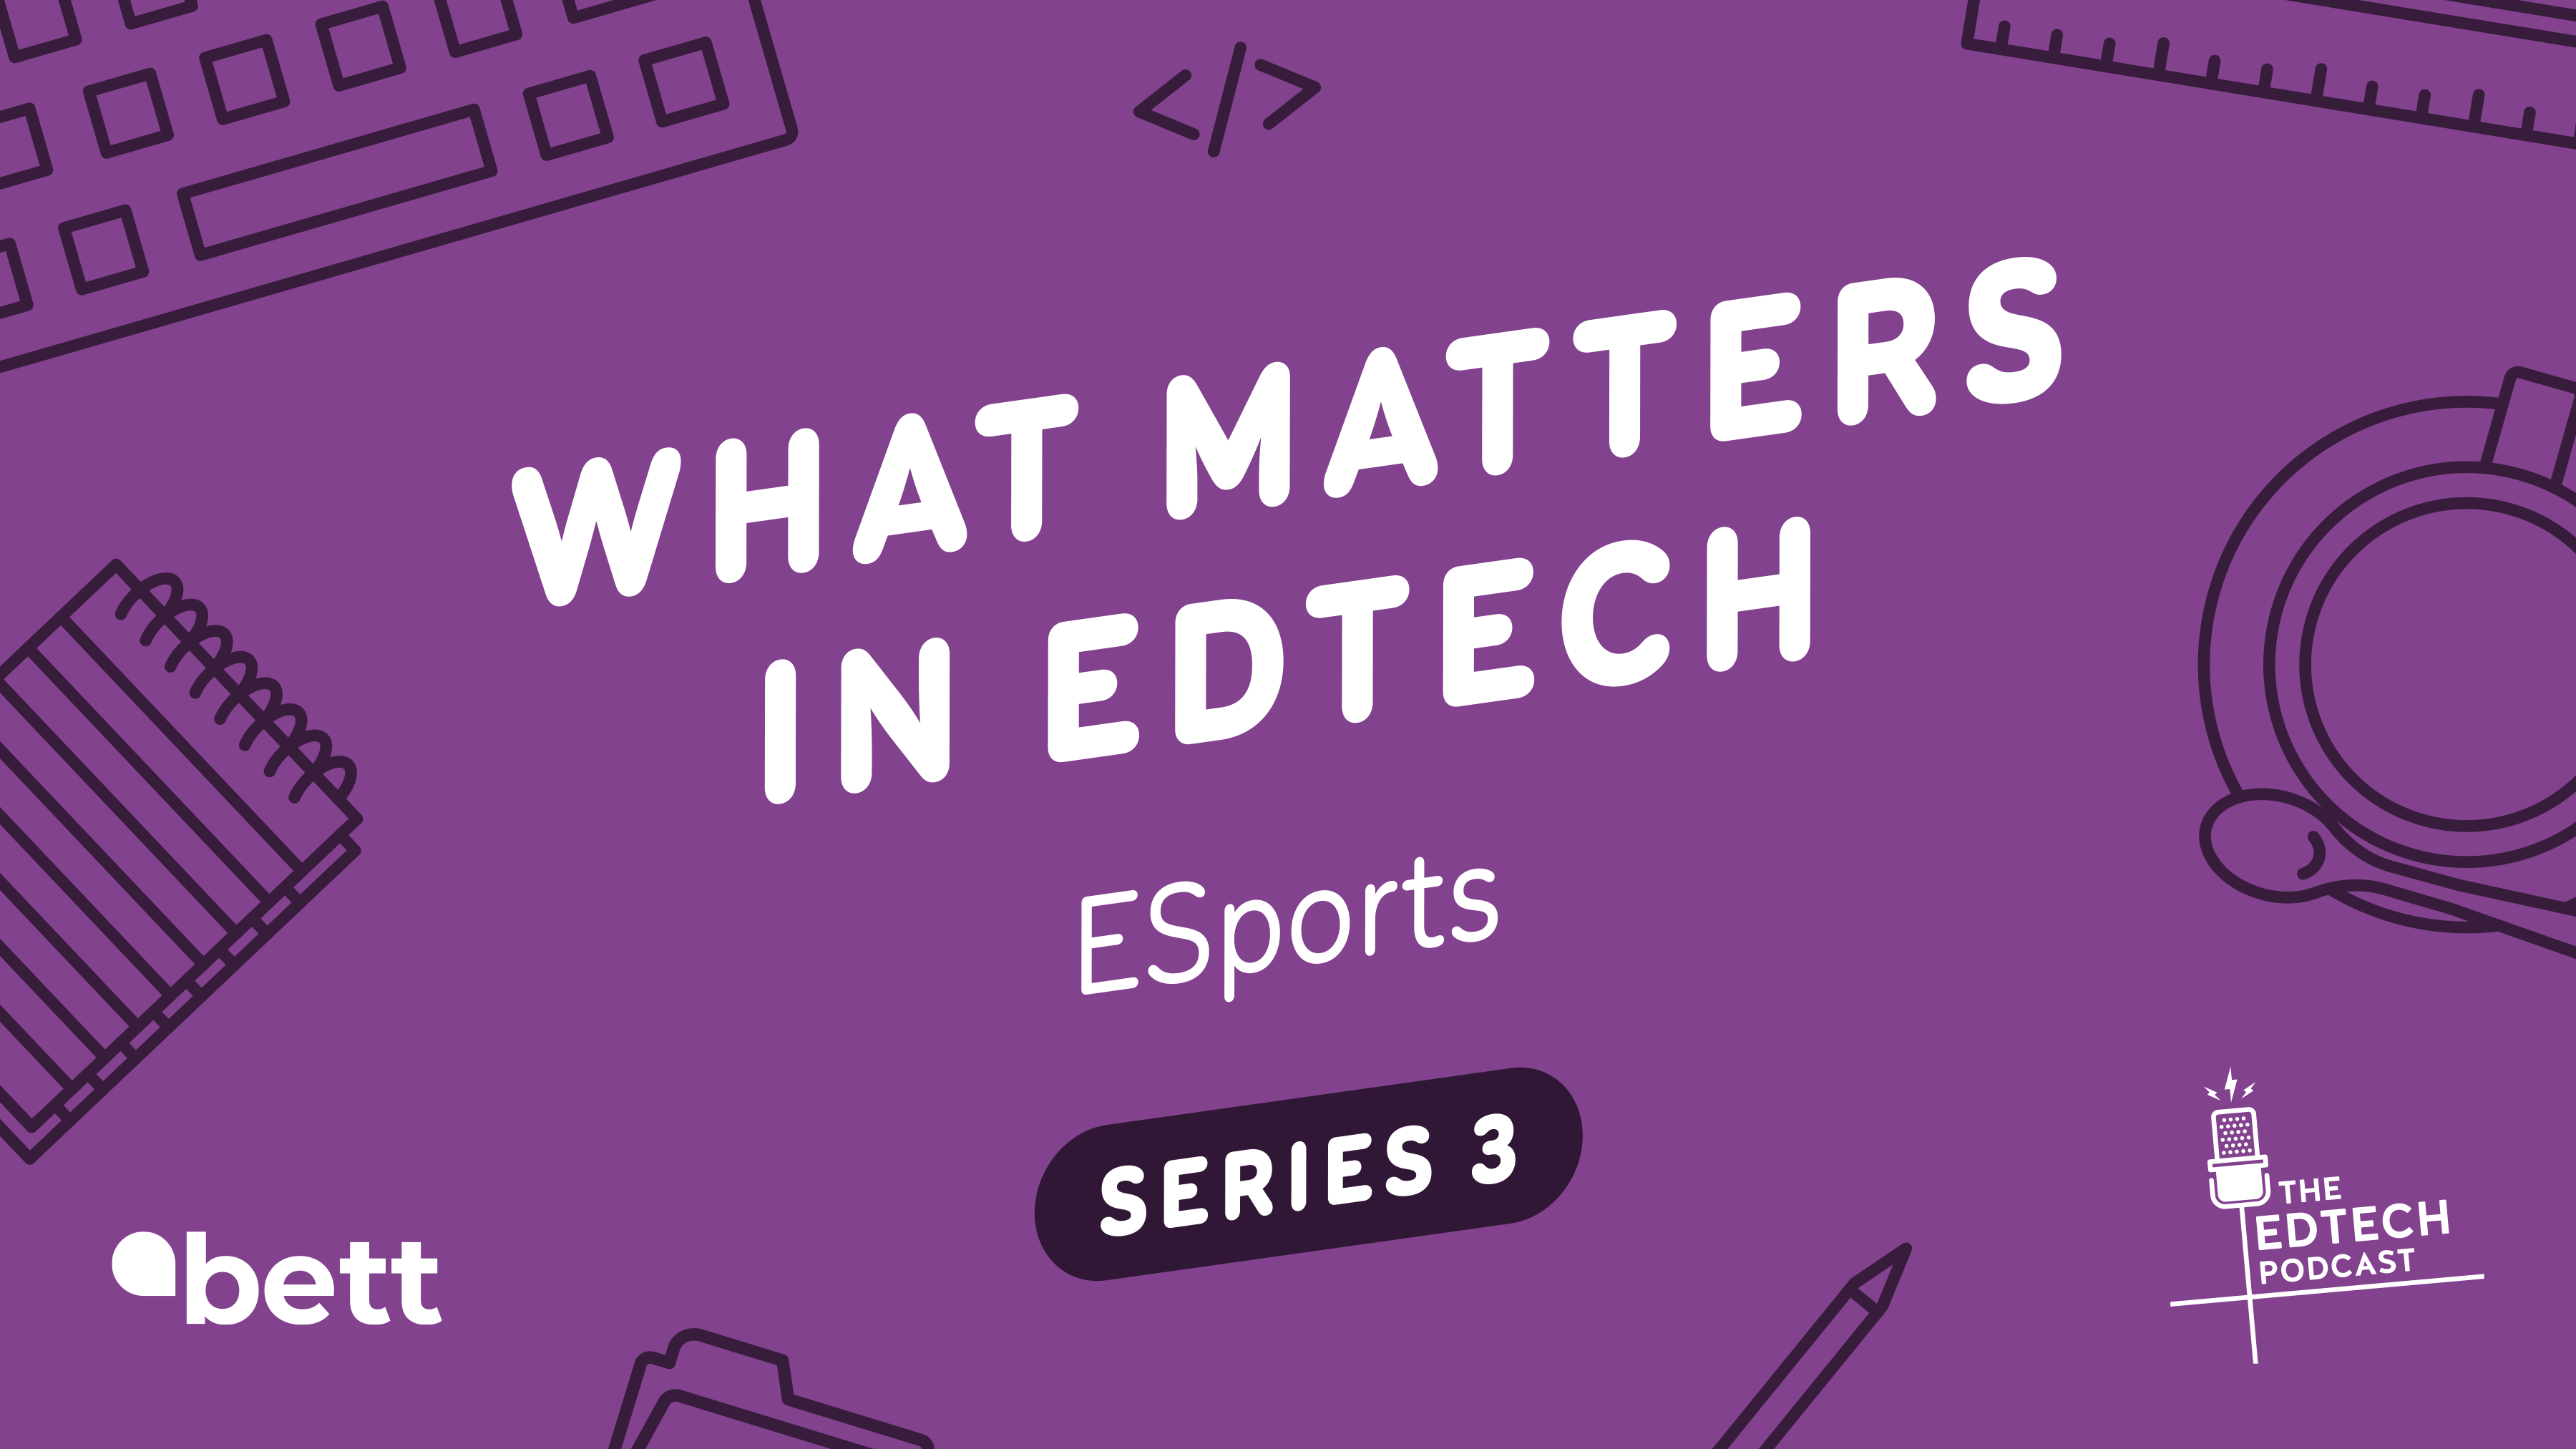 Esports - why does it matter?